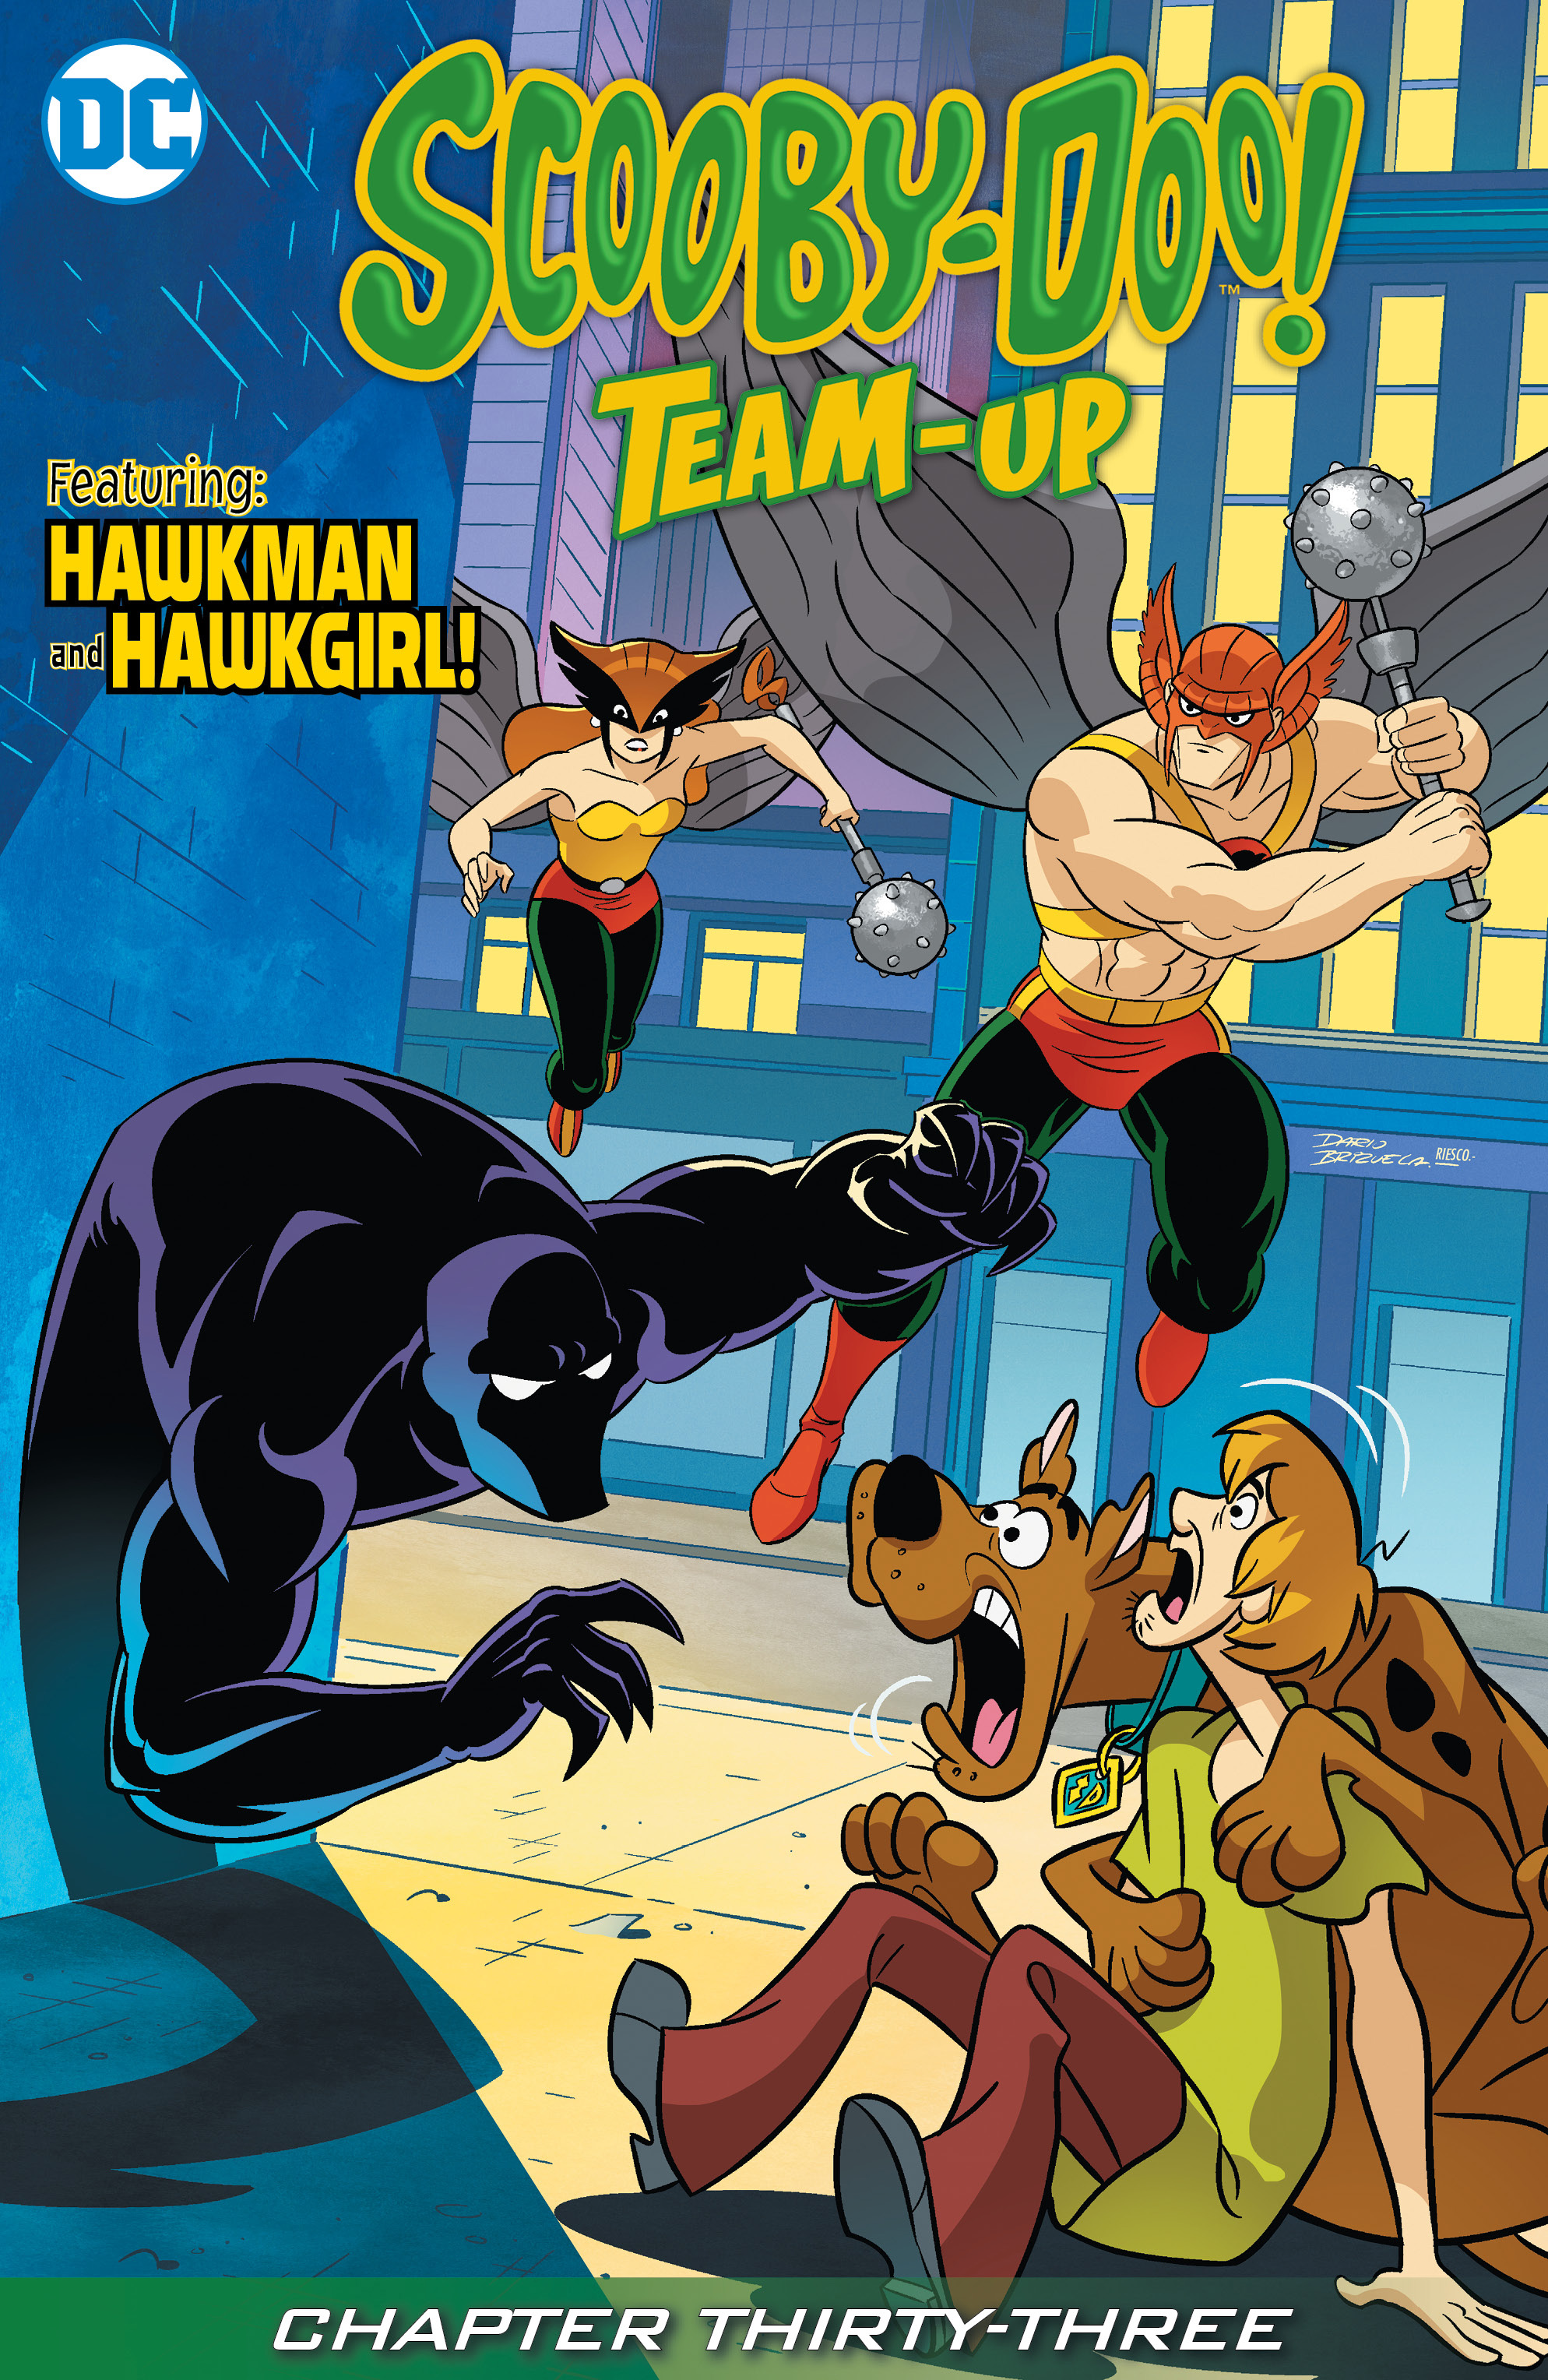 Read online Scooby-Doo! Team-Up comic -  Issue #33 - 2